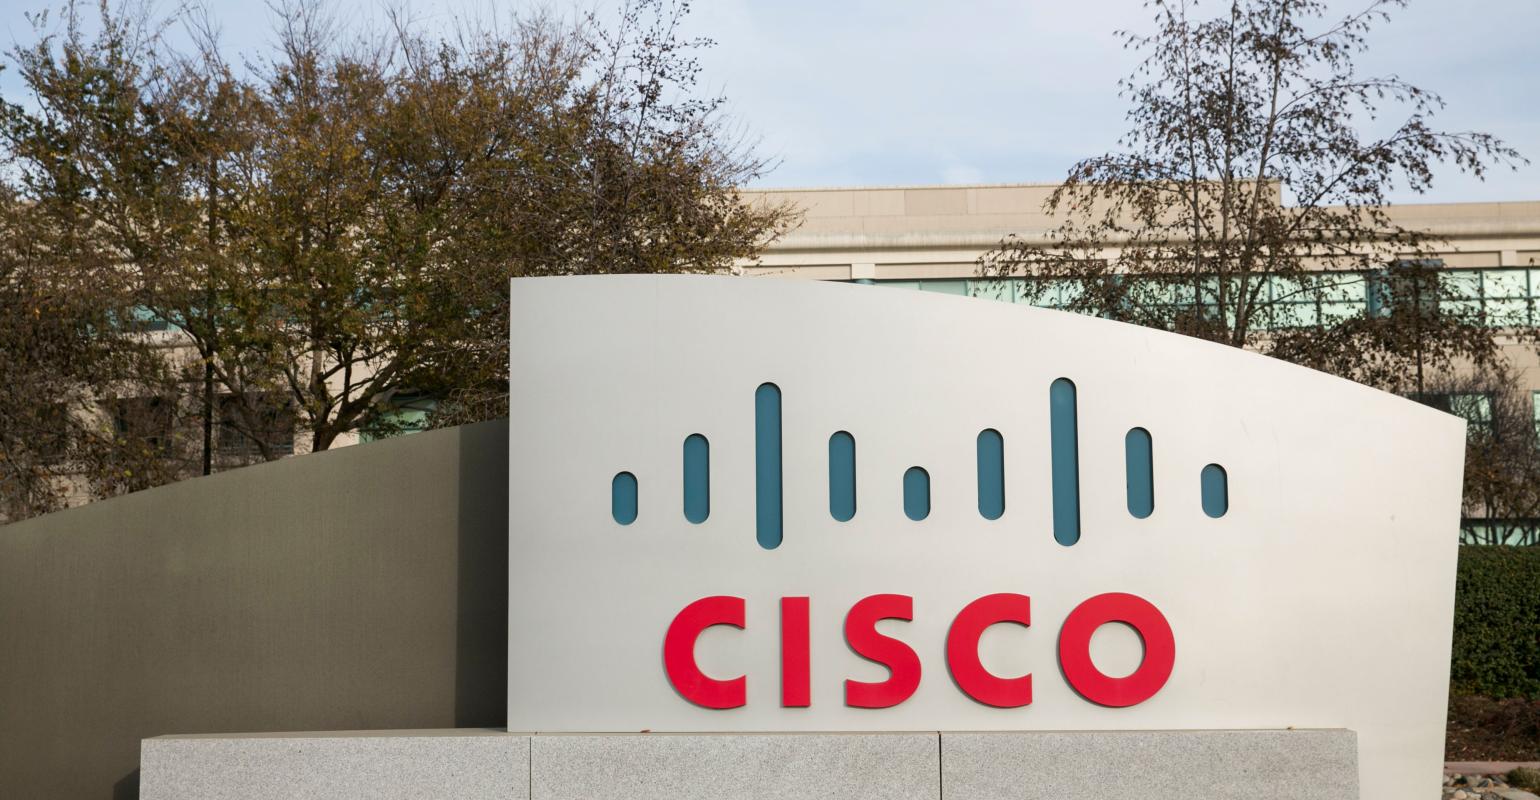 NTT and Cisco plan to co-innovate and jointly bring to market the technology and managed services that will enable enterprise customers to deploy Private 5G successfully